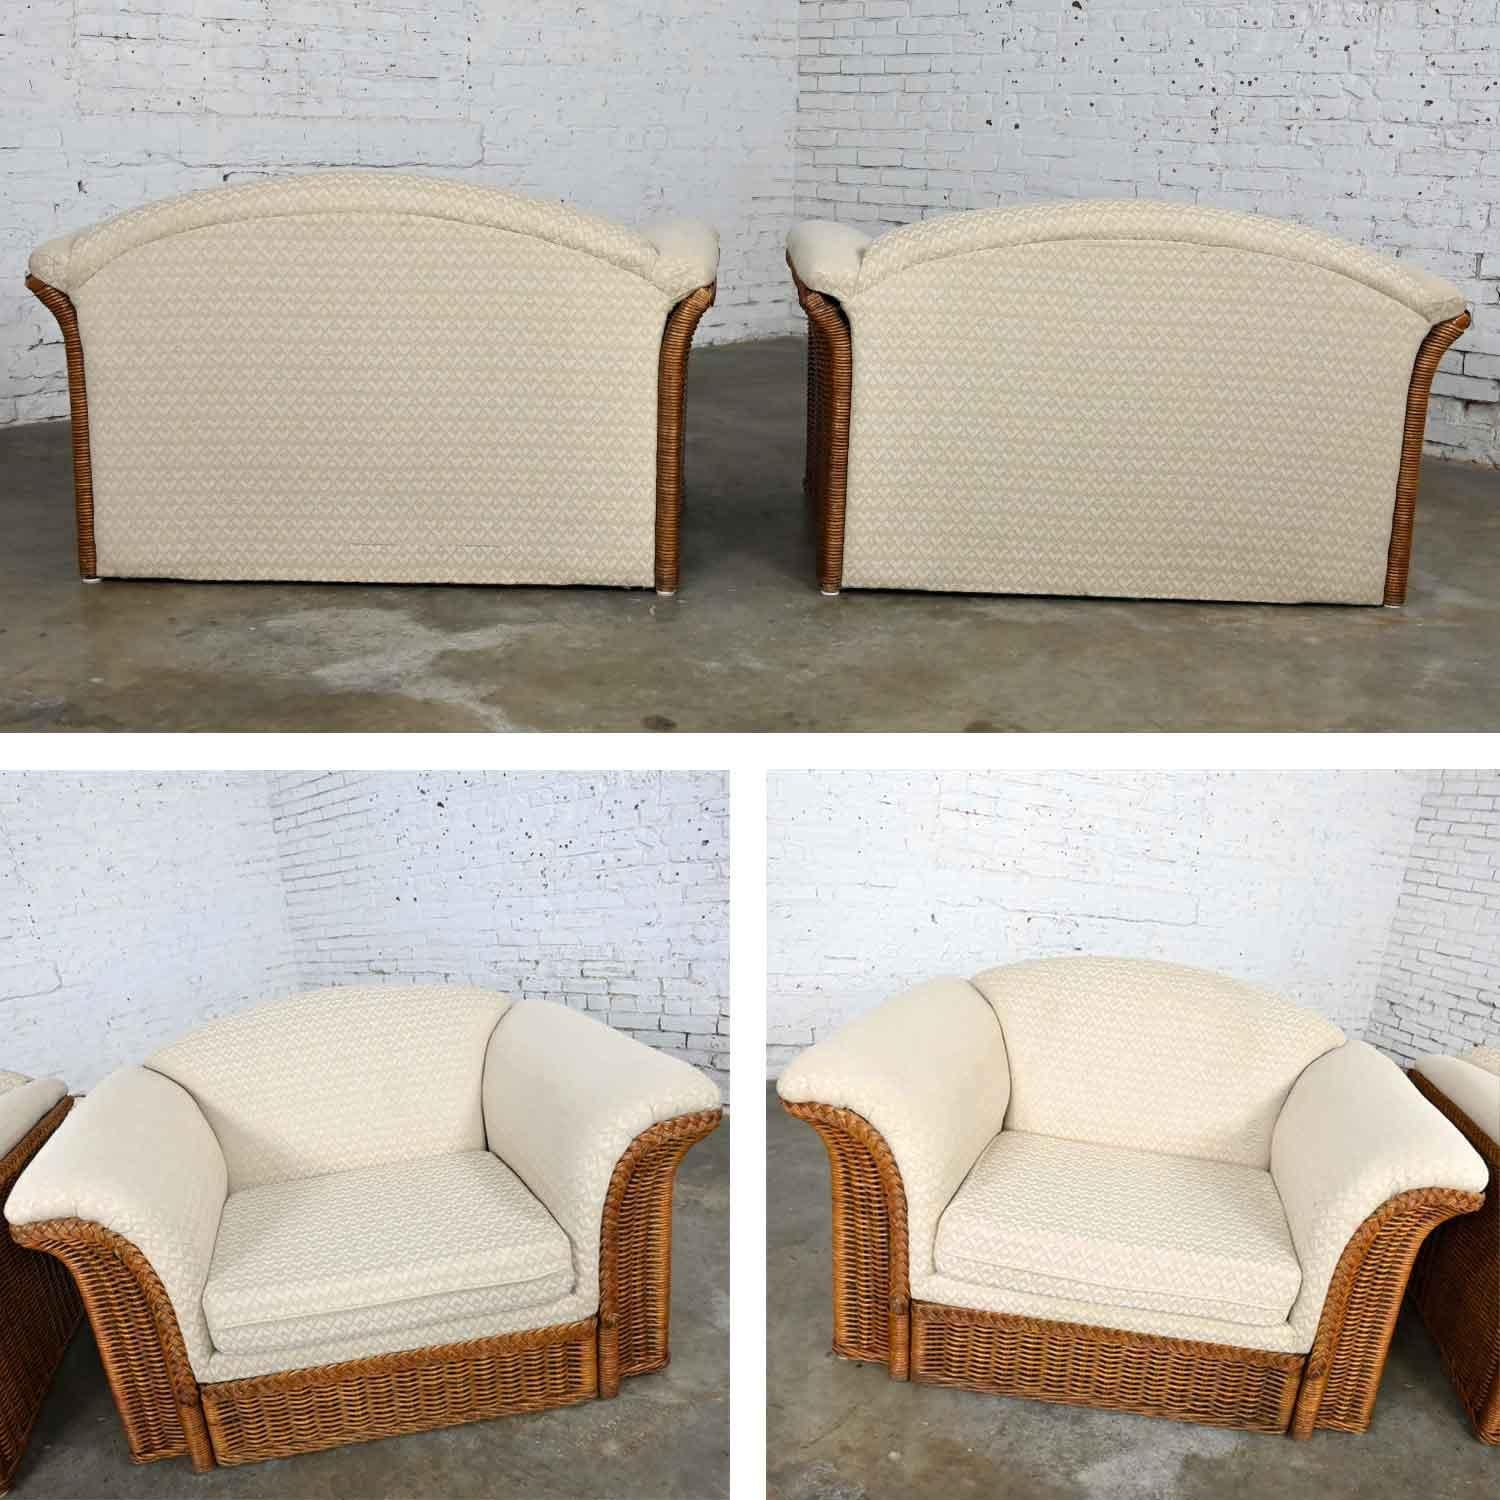 Rattan Wicker Pair of Oversized Lounge Chairs Manner of Michael Taylor For Sale 8